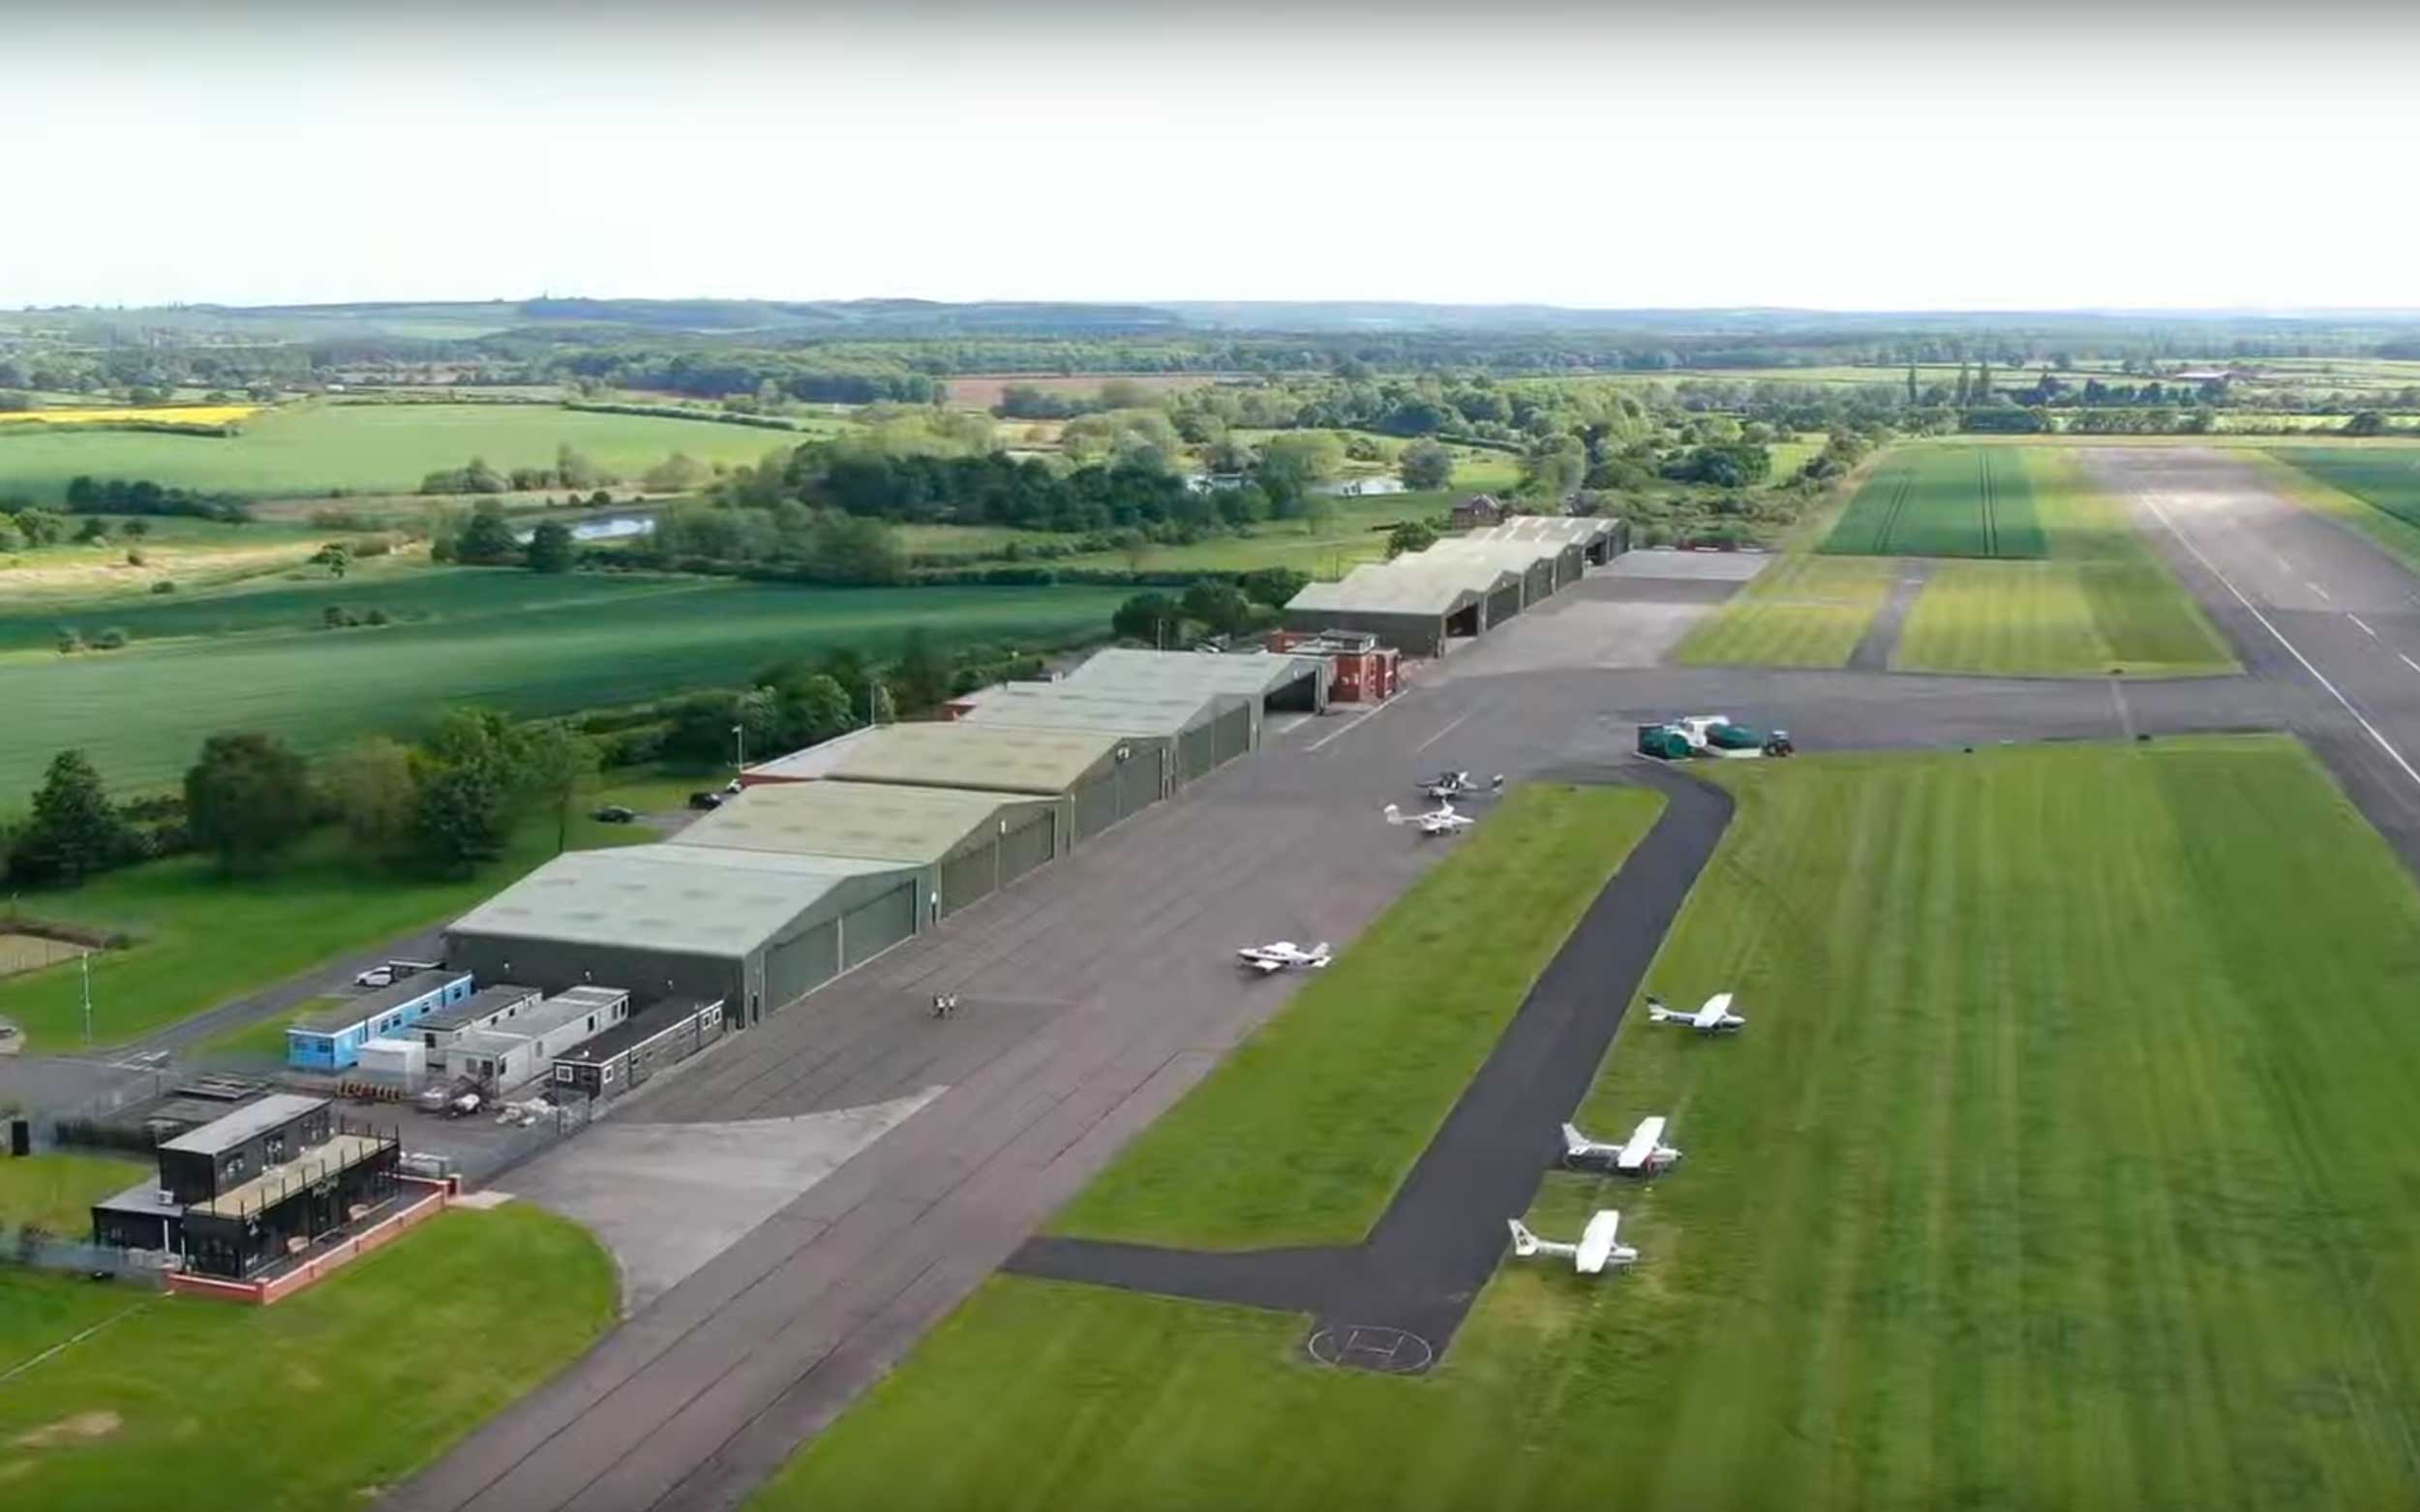 Gamston pilots and businesses wait for Thatcham decision : 